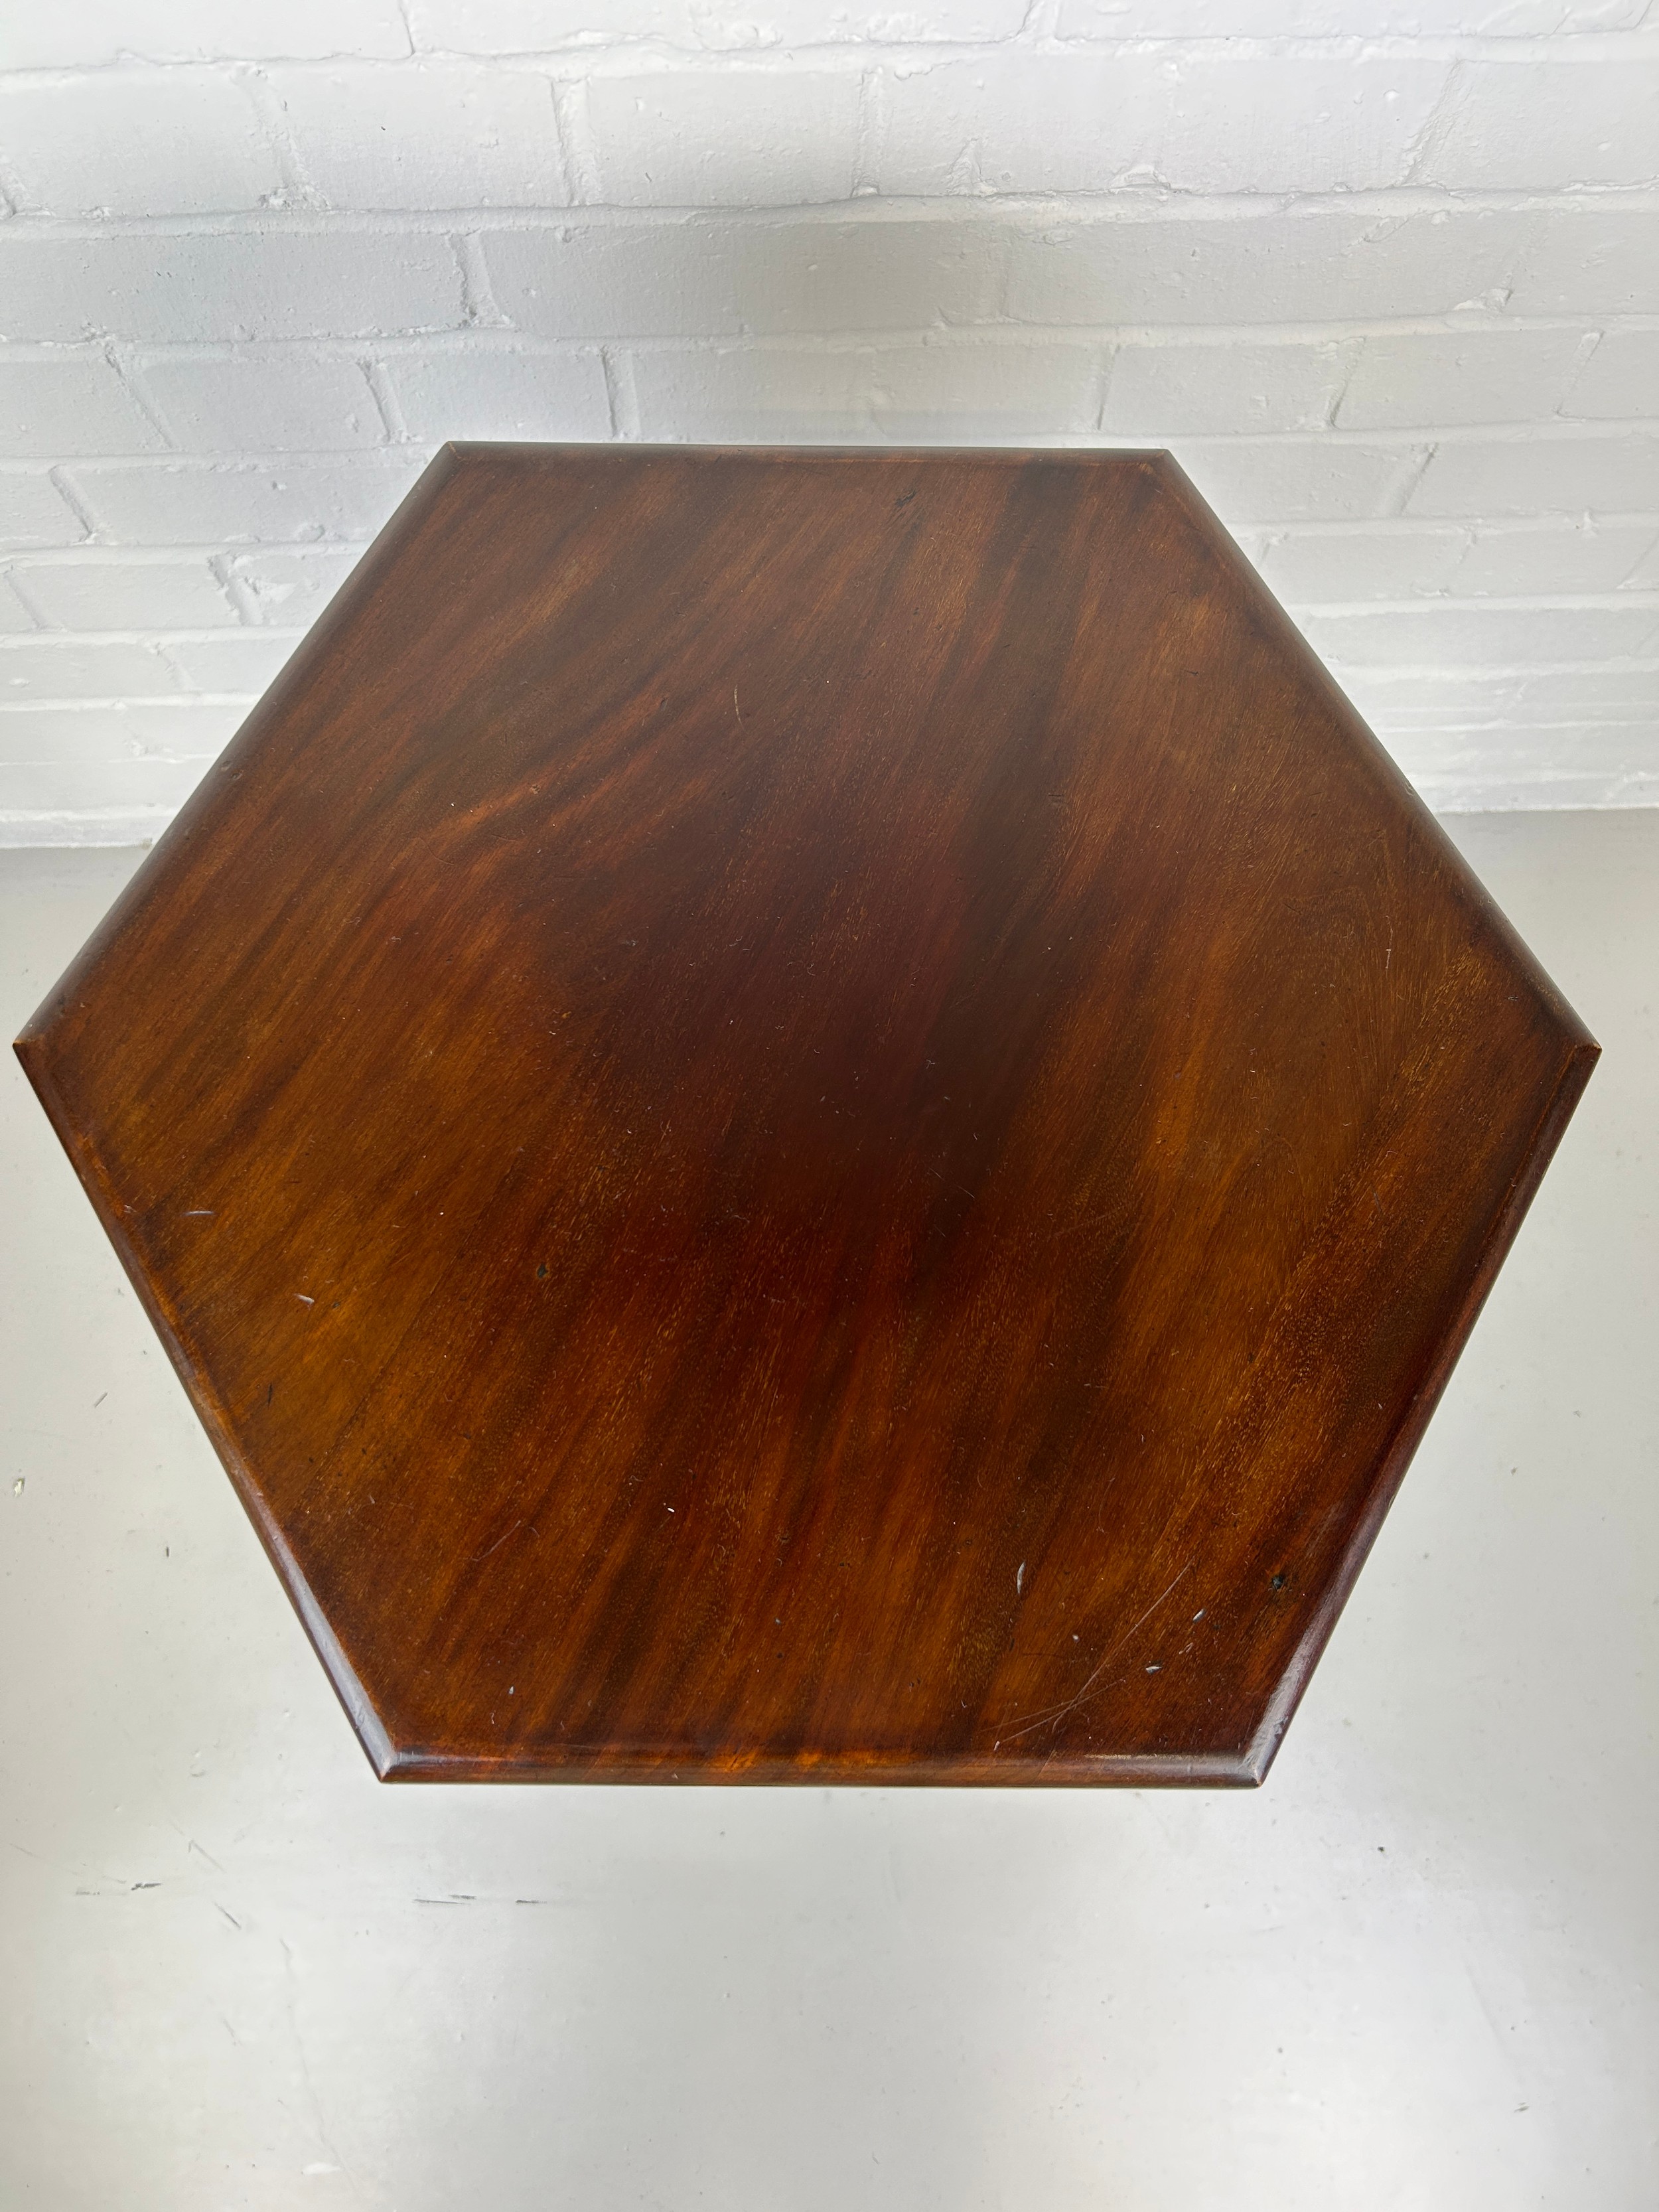 A HEXAGONAL ARTS AND CRAFTS DESIGN TABLE, 67cm H x 44cm W - Image 3 of 4